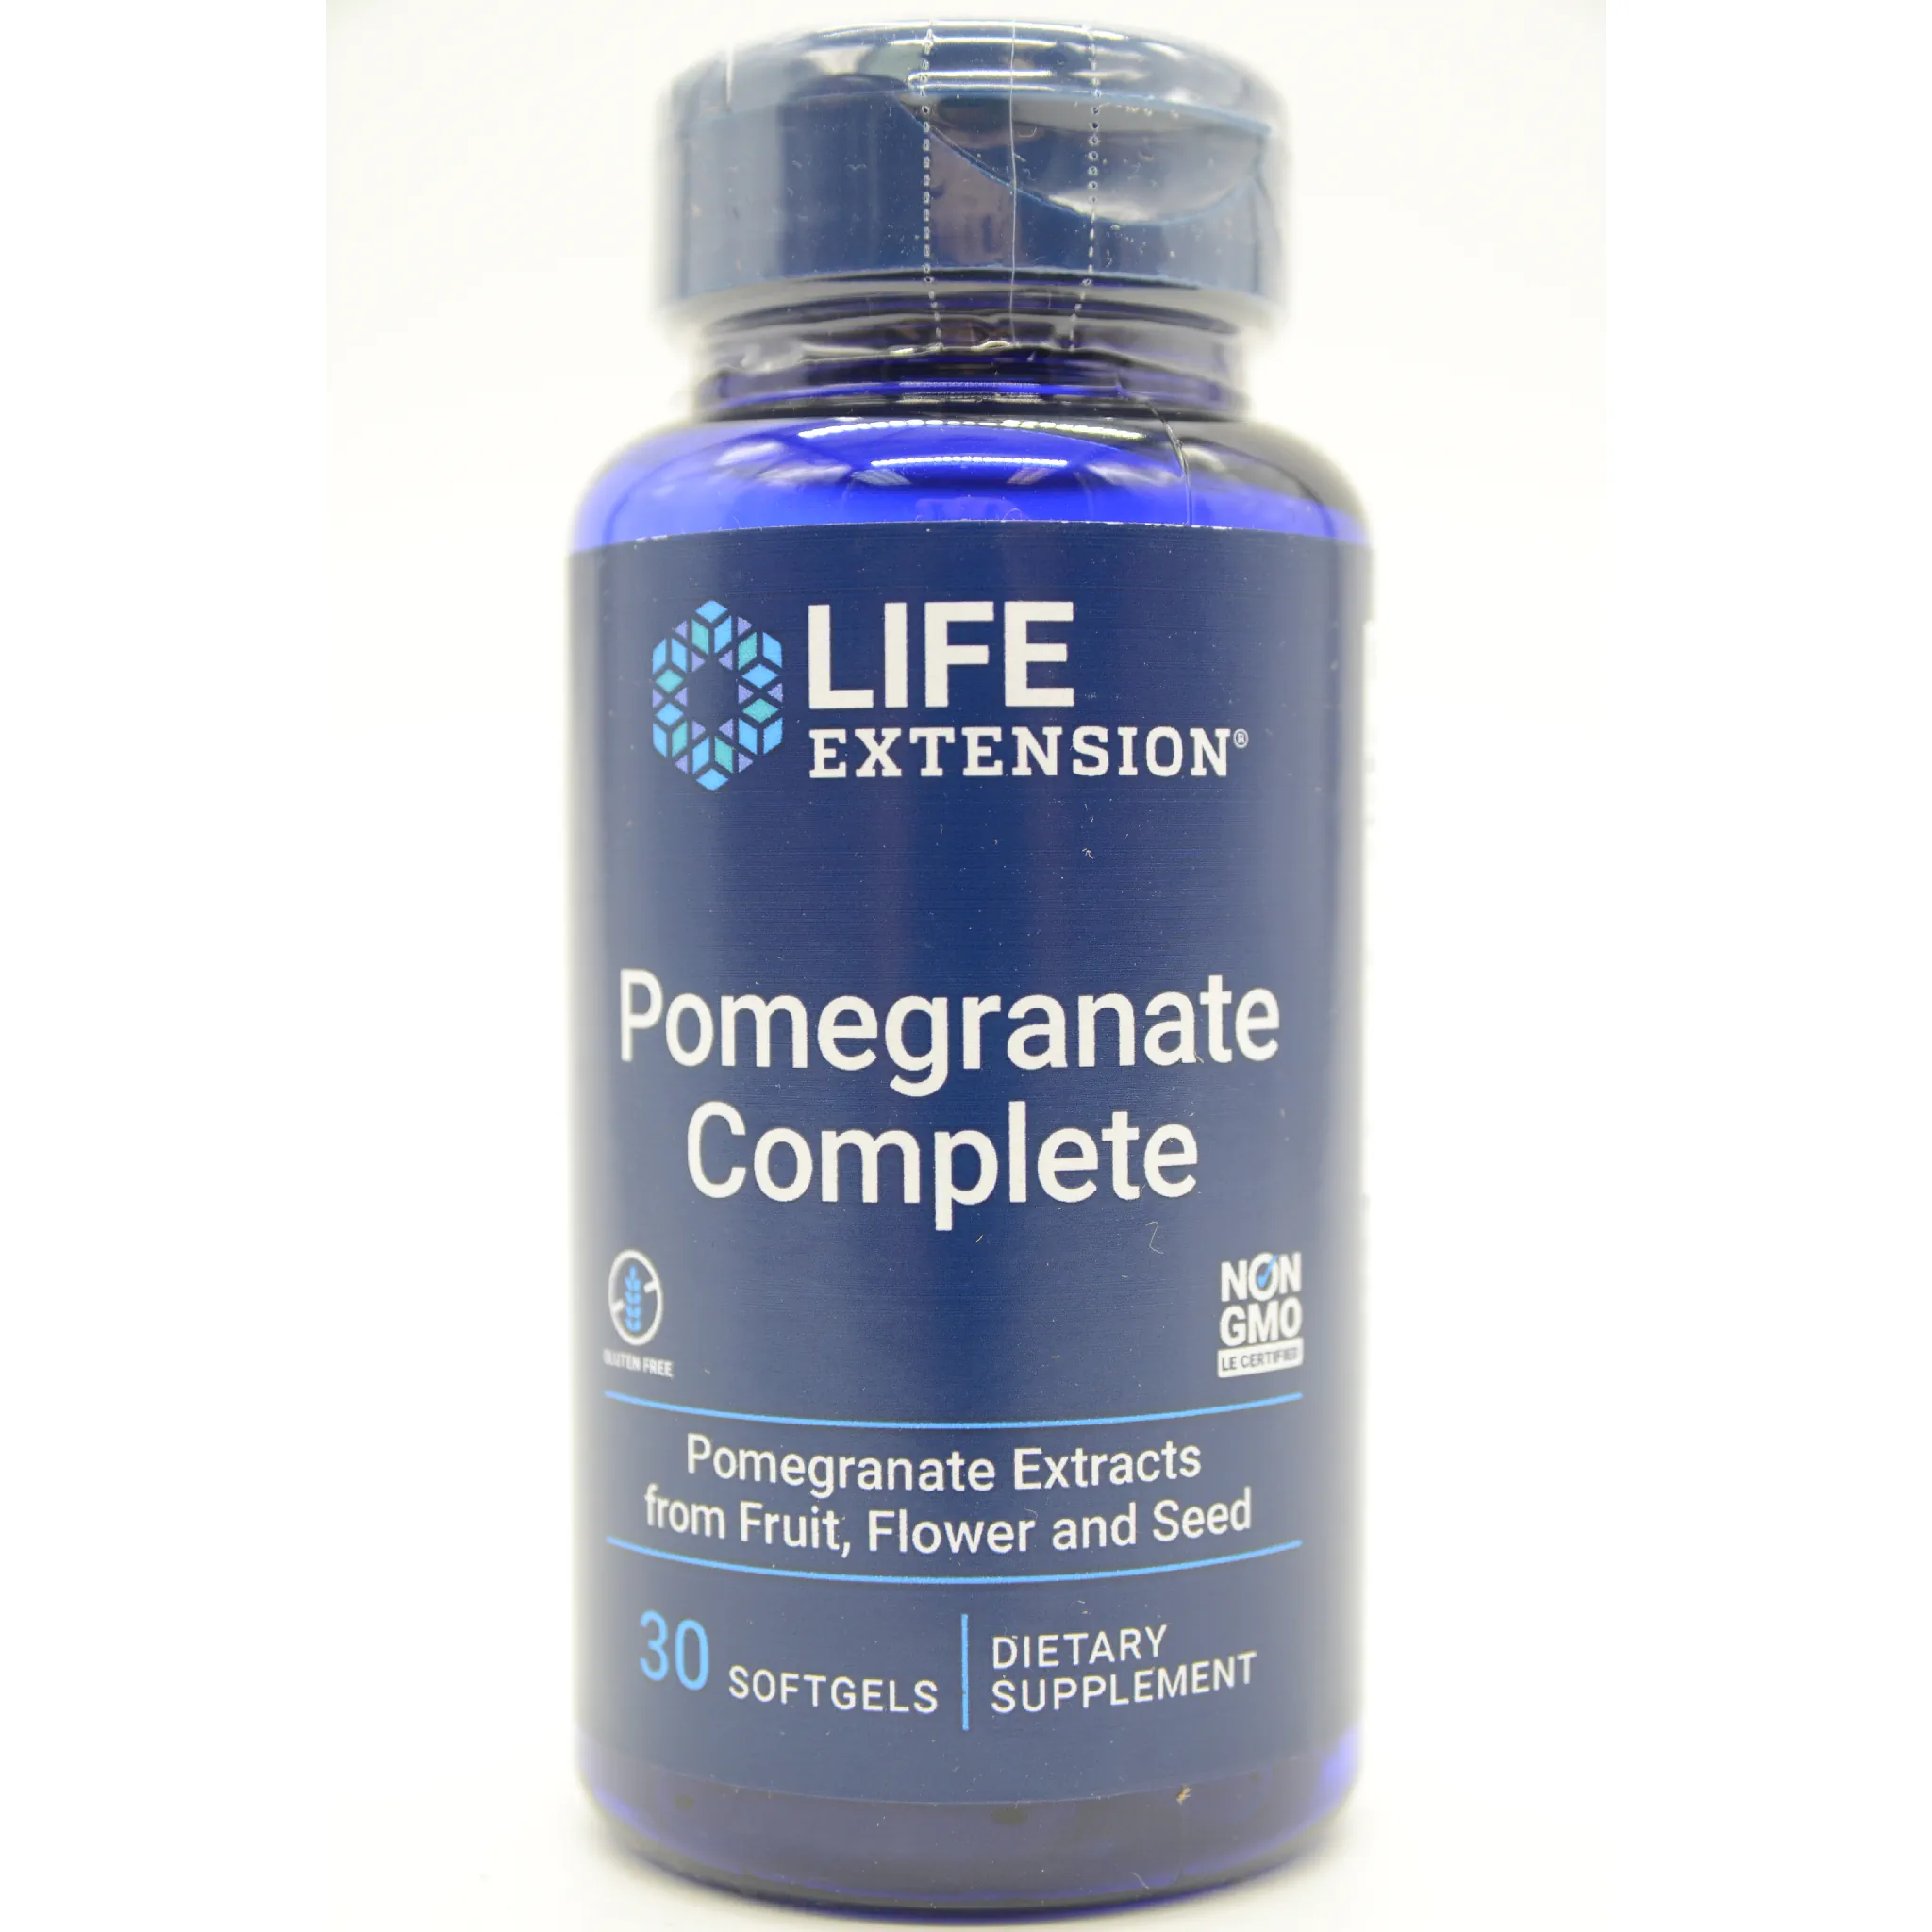 Life Extension - Pomegranate Complete